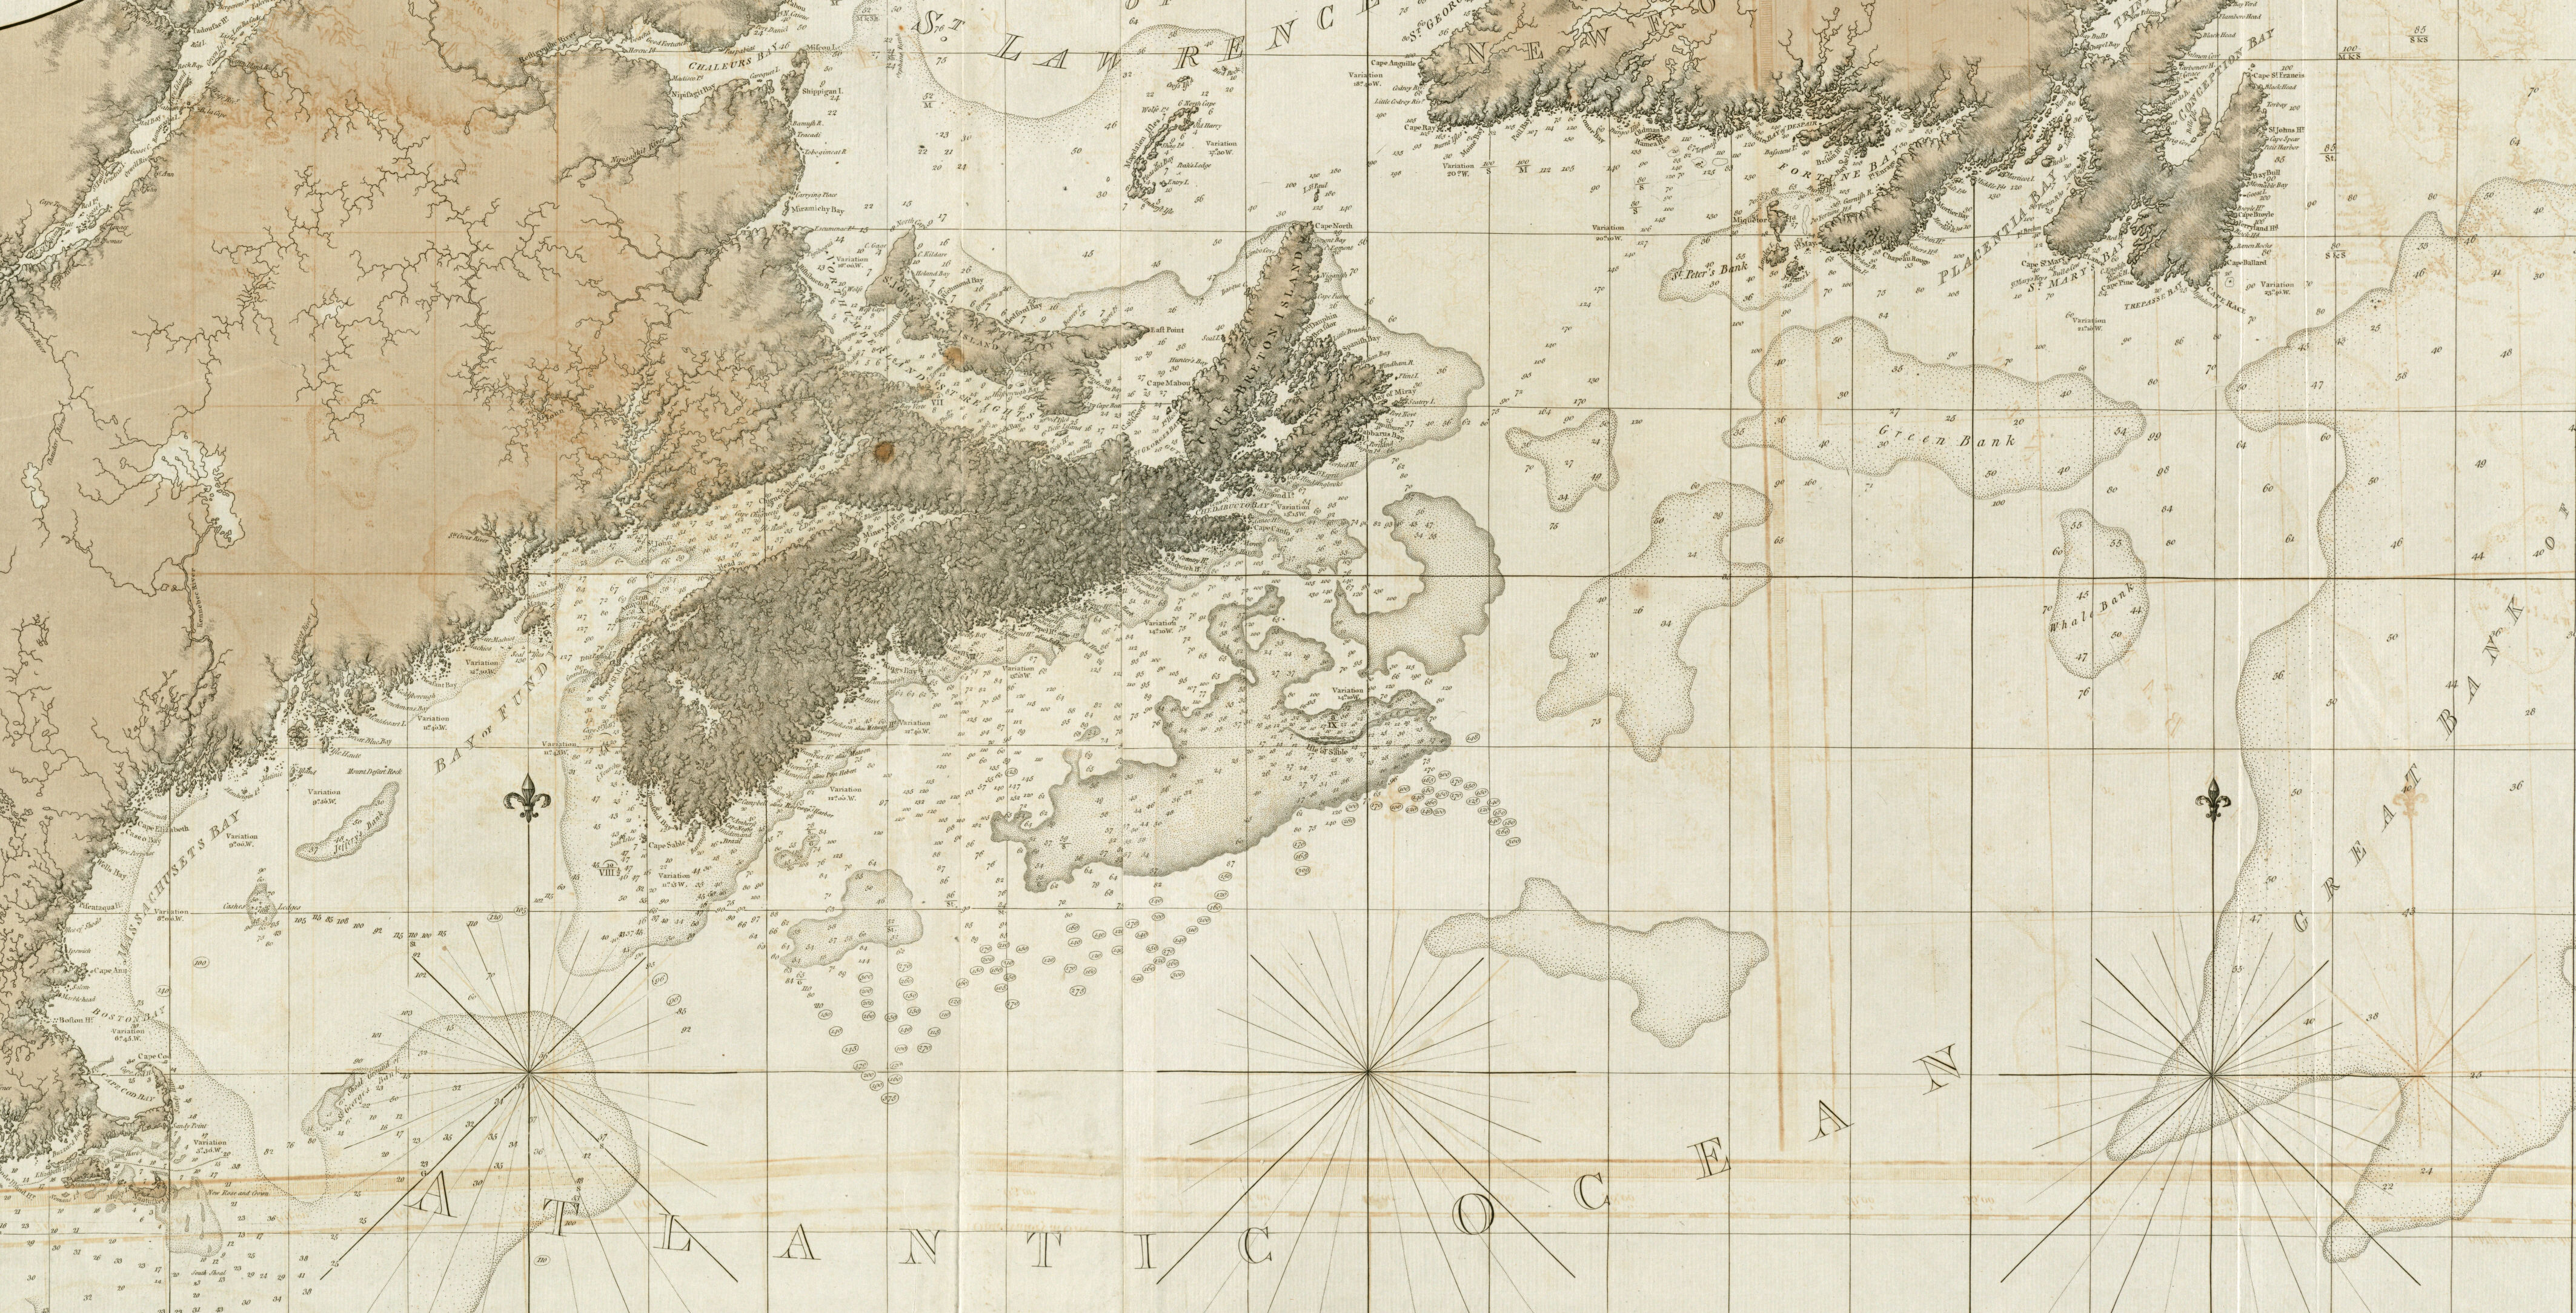 Section of a map of the coast of New England and Canada, with various portions labeled to indicate navigational details, such as tidal depths and bottom information